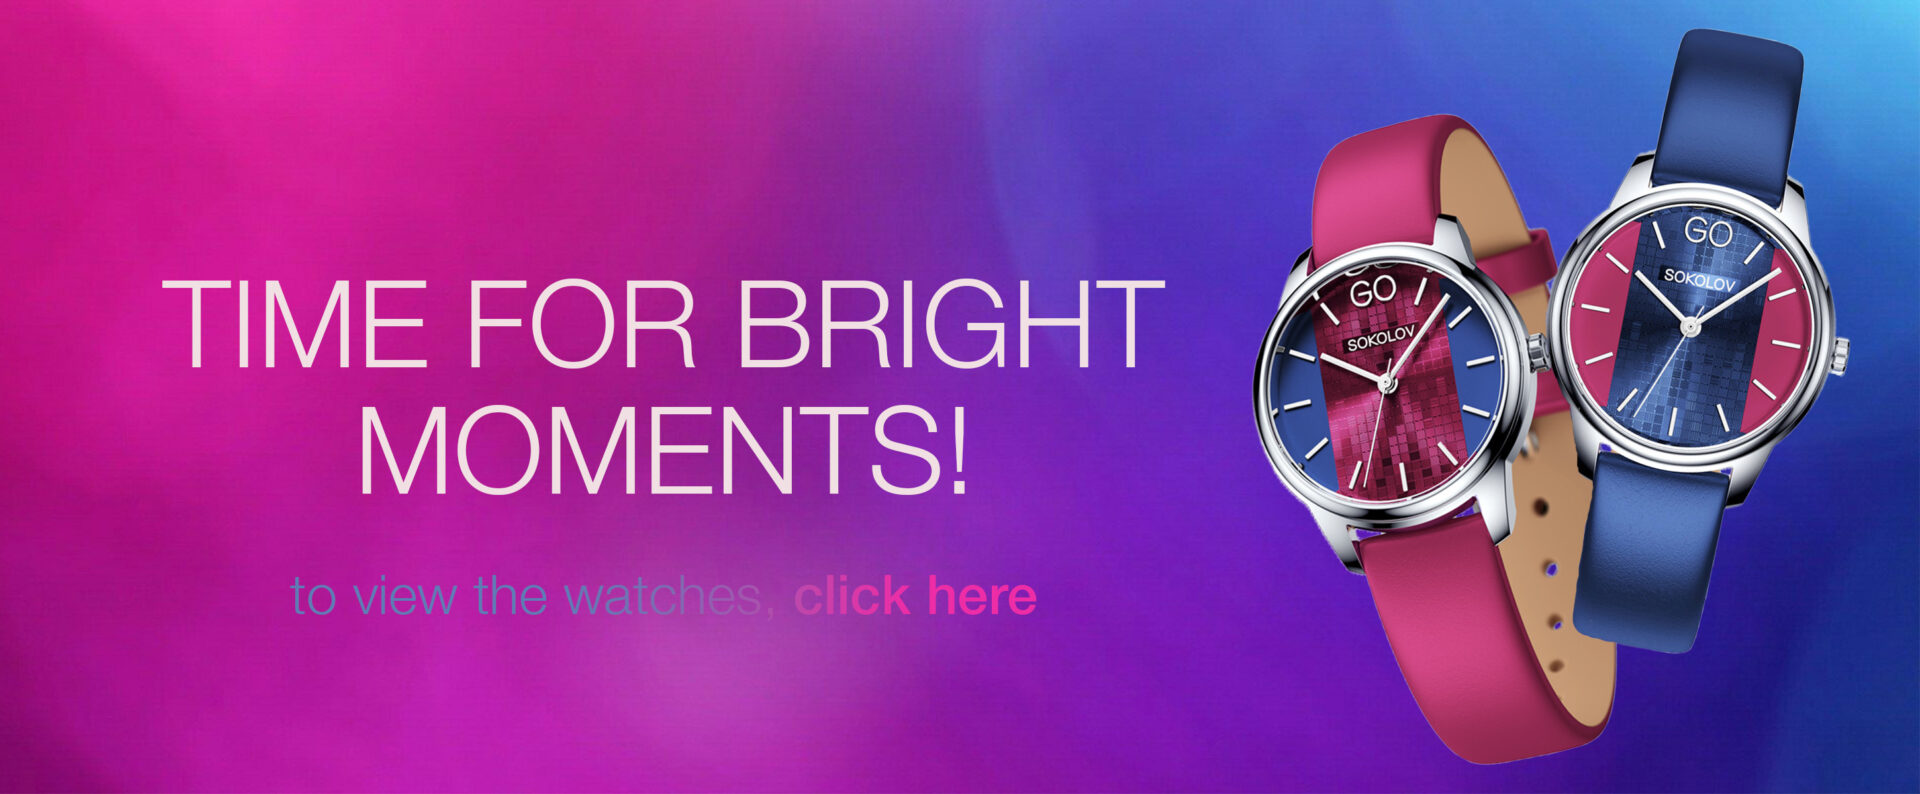 Bright colourful banner with pink and blue wrist watch by the title - Time for bright moments!